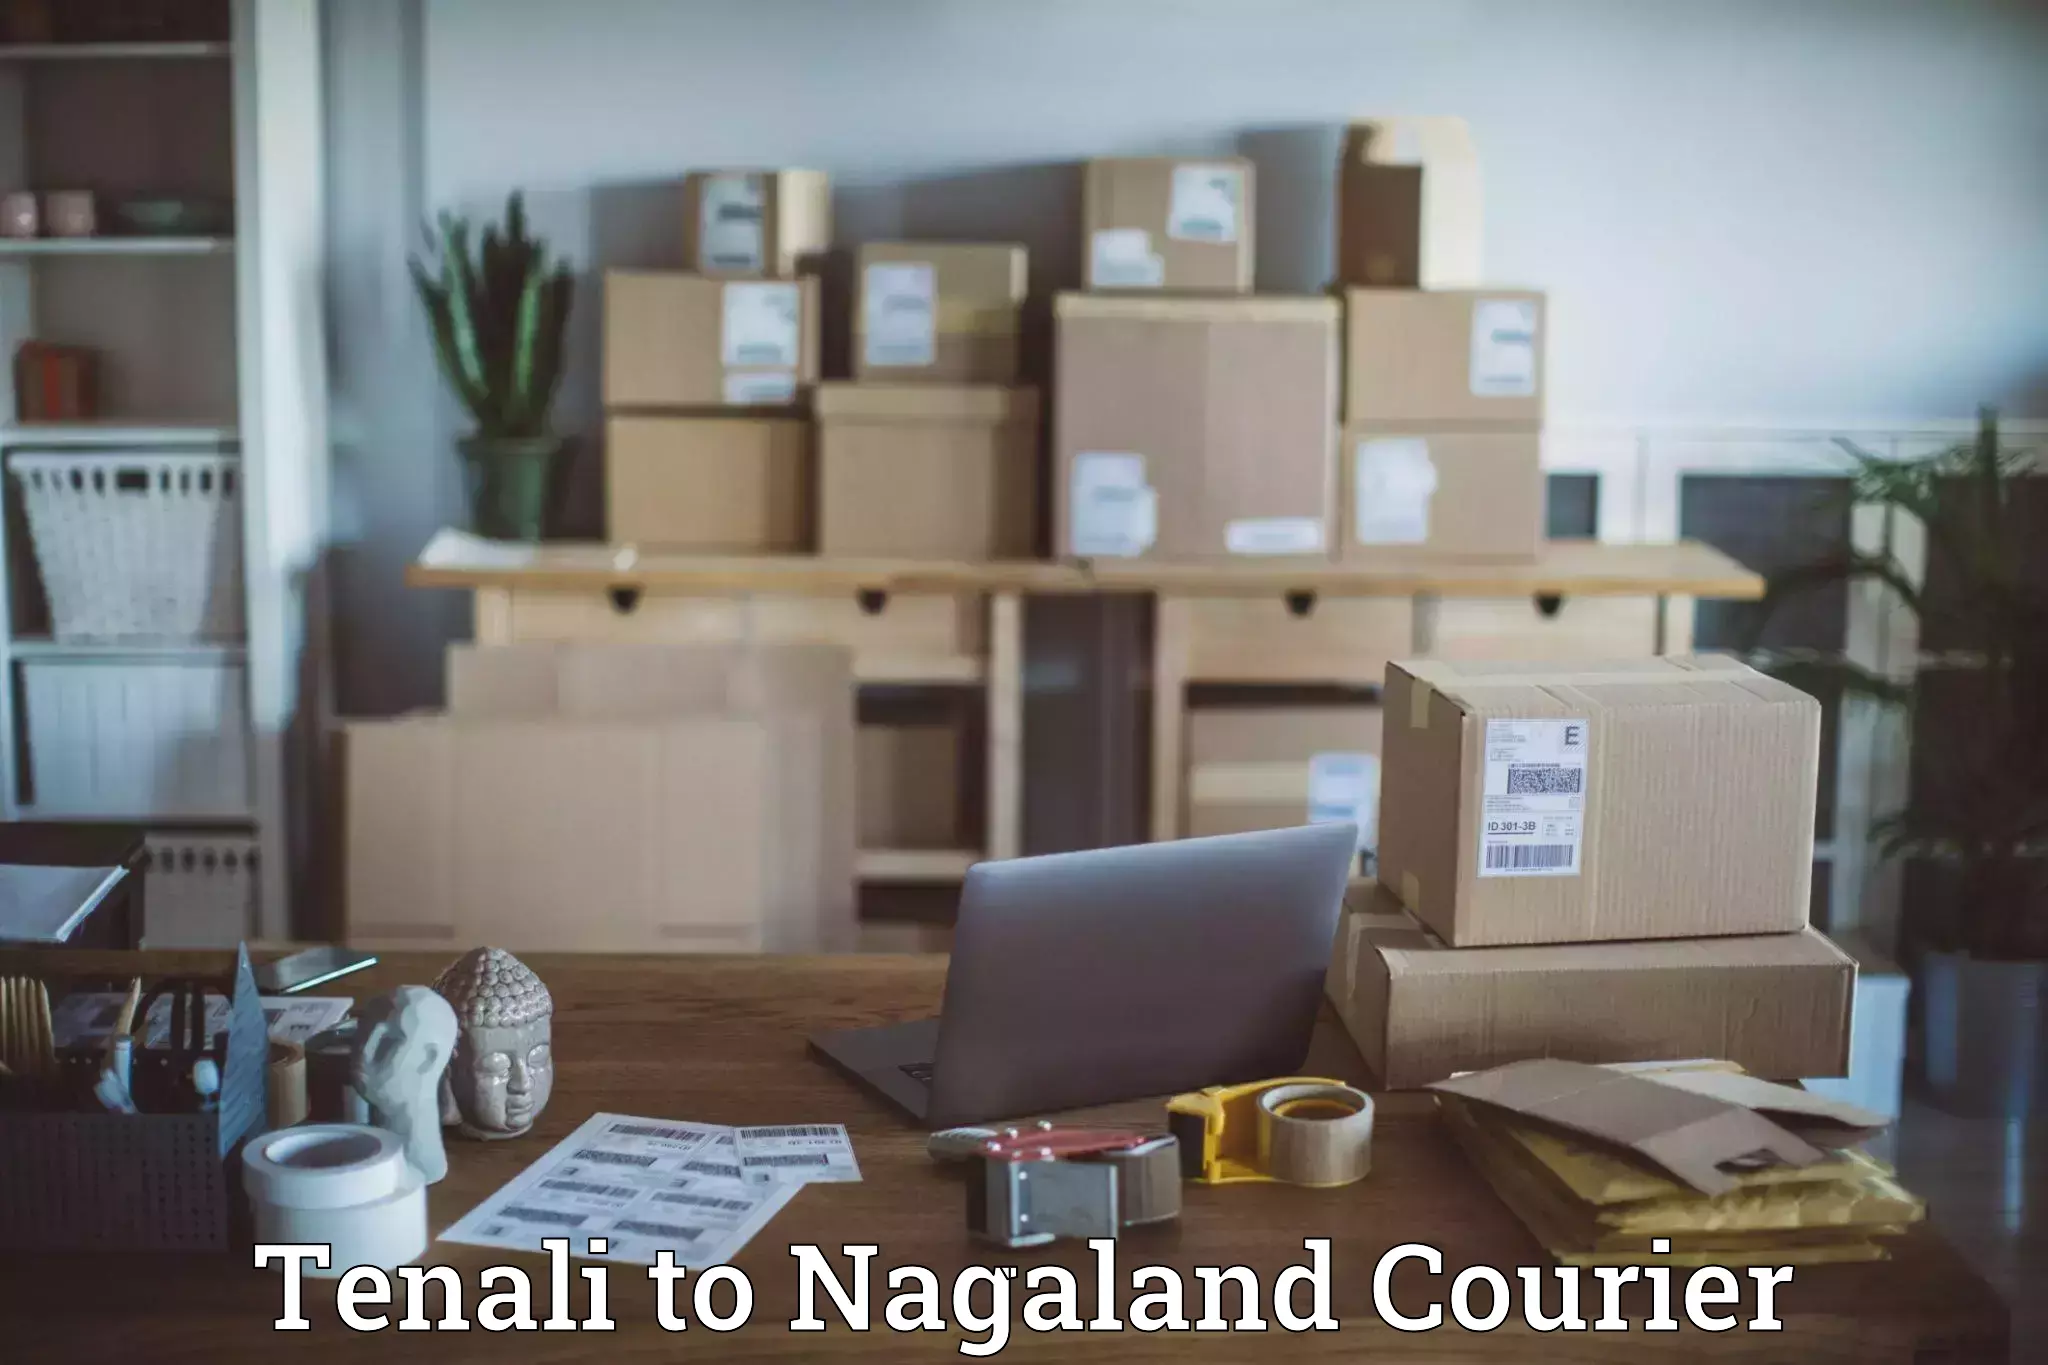 User-friendly delivery service Tenali to Nagaland